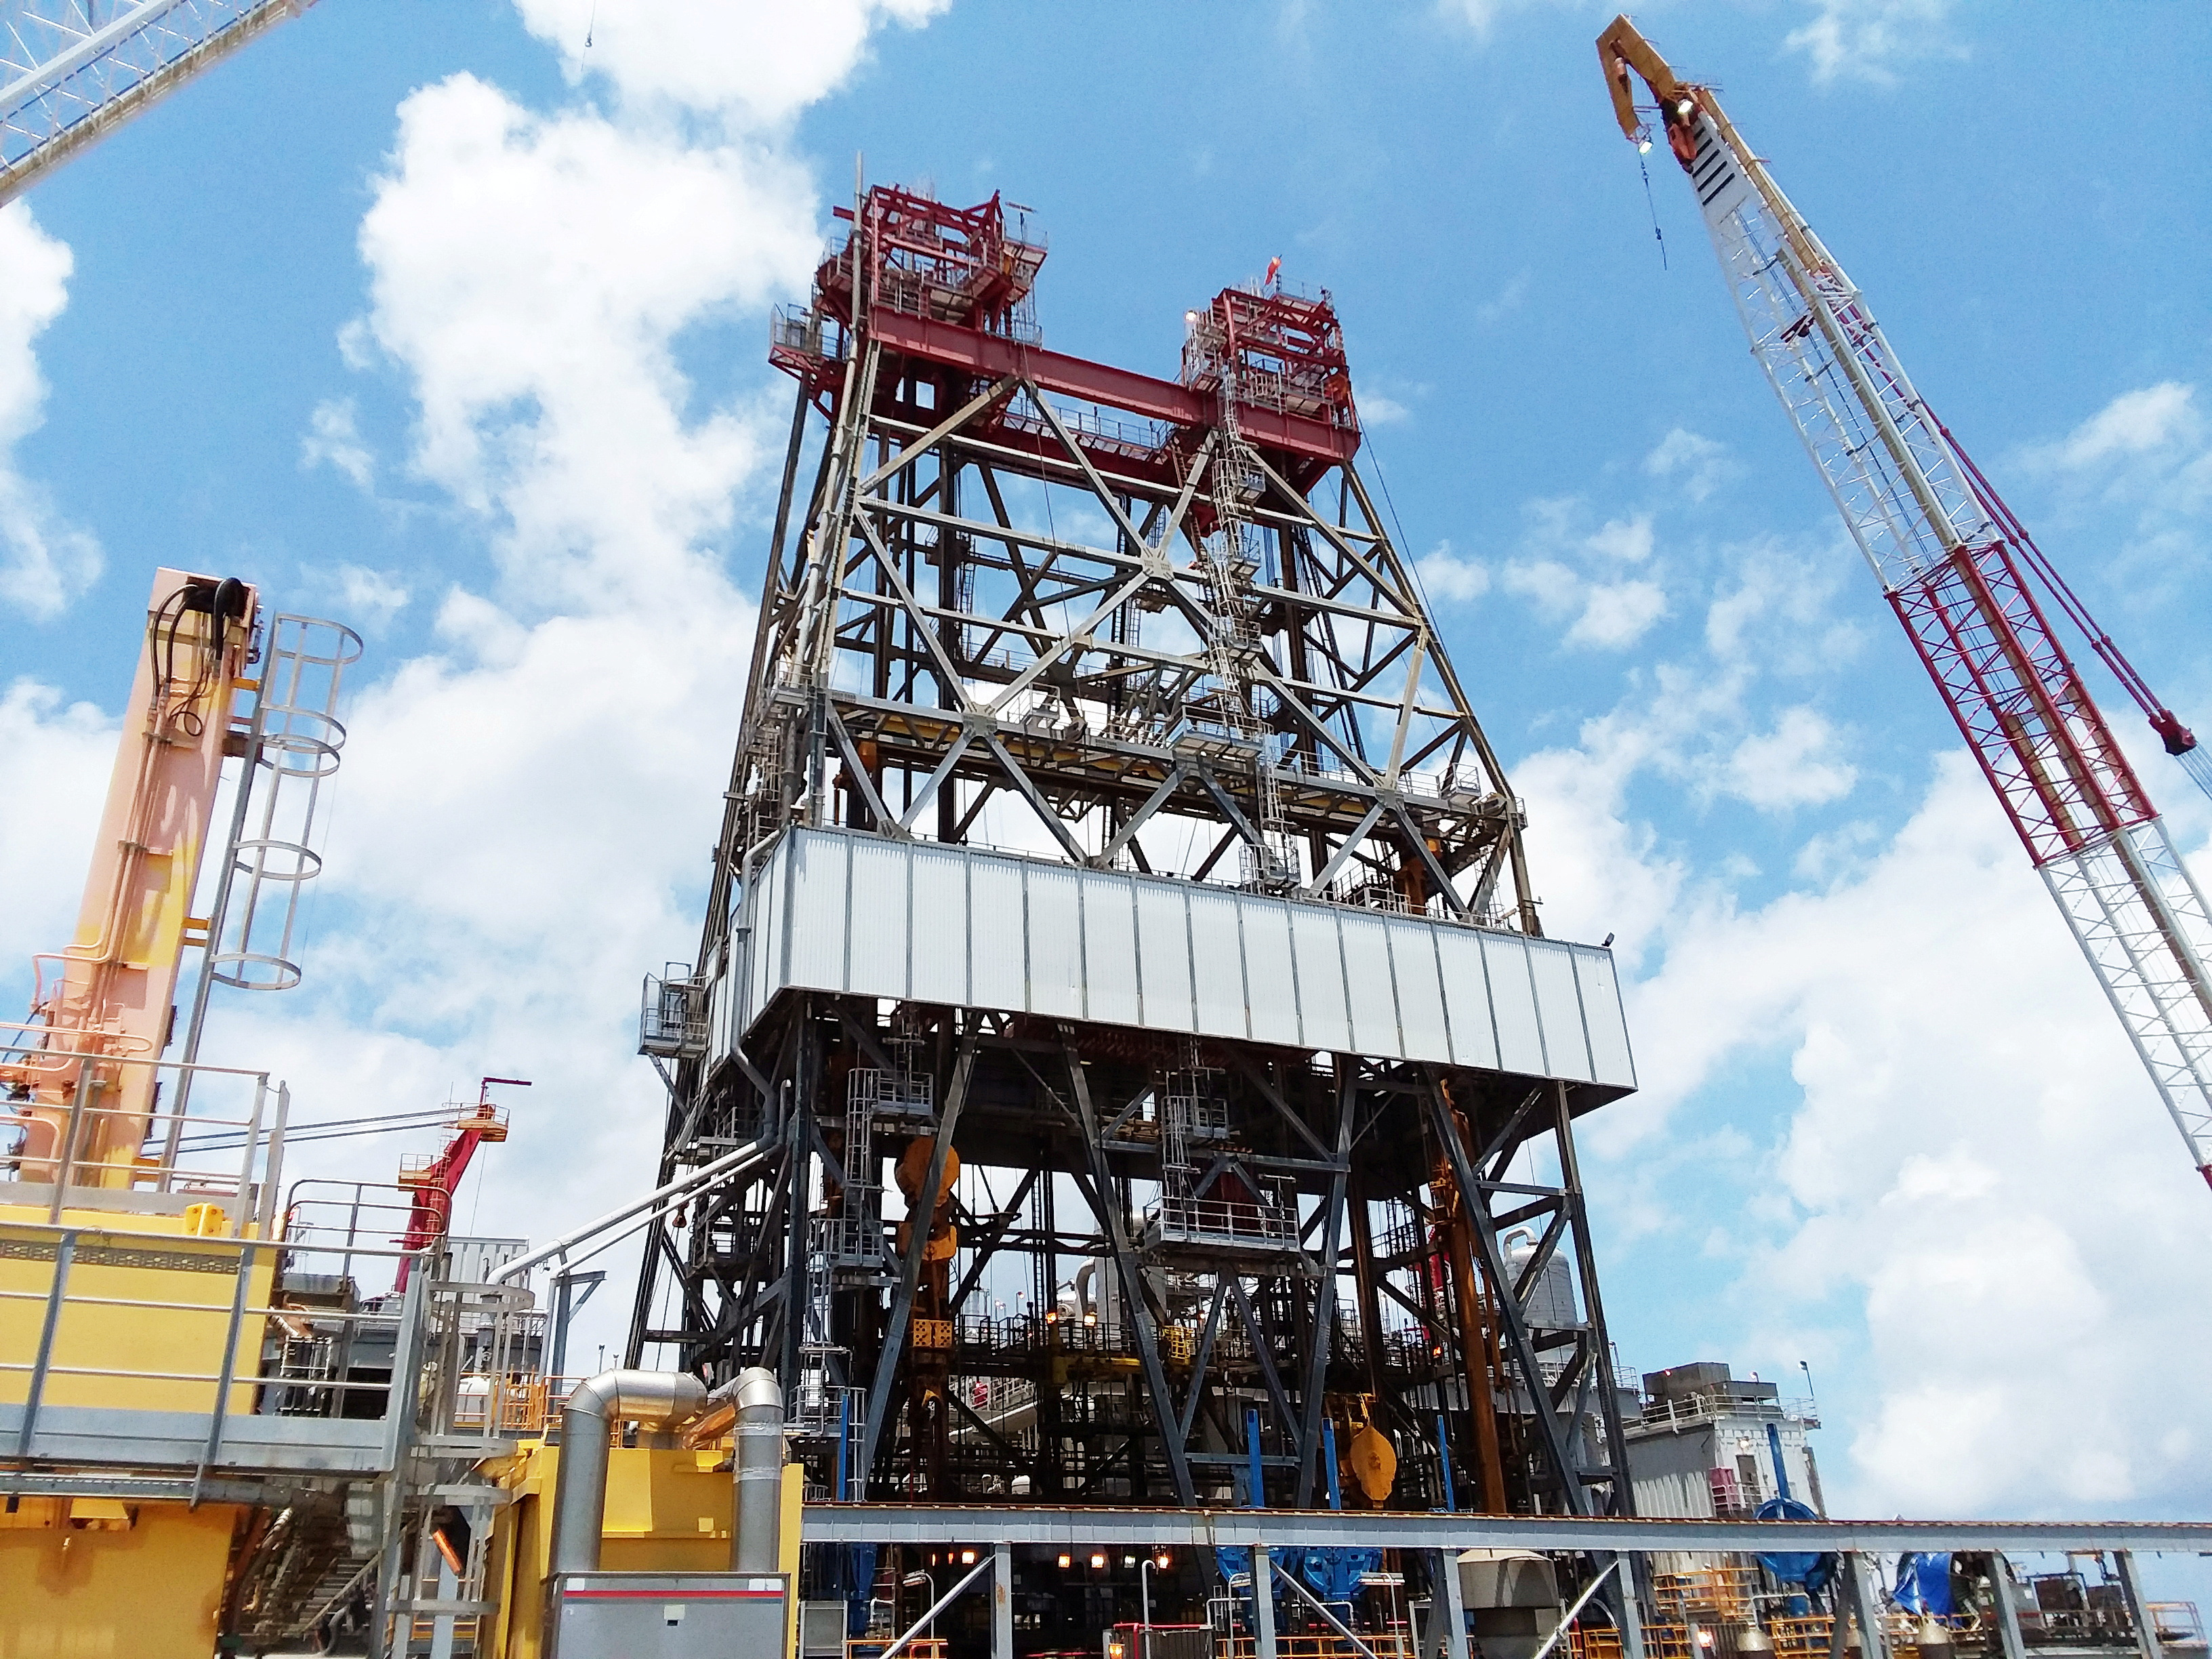 A massive drilling derrick is pictured on BP's Thunder Horse Oil Platform in the Gulf of Mexico